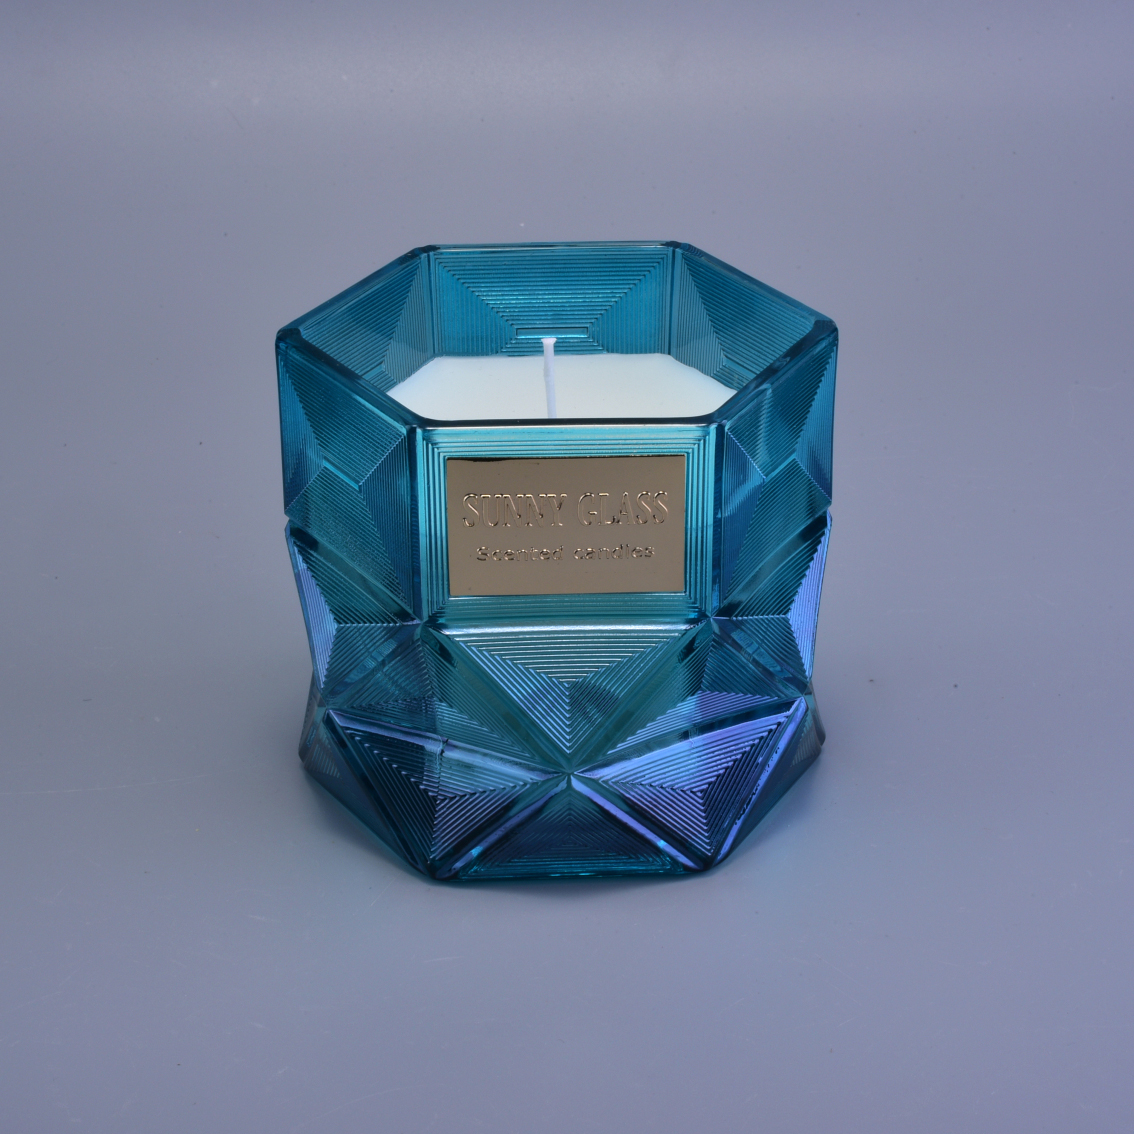 Glass Candle Jars with Polygon Design for Home Decor Scented Candles